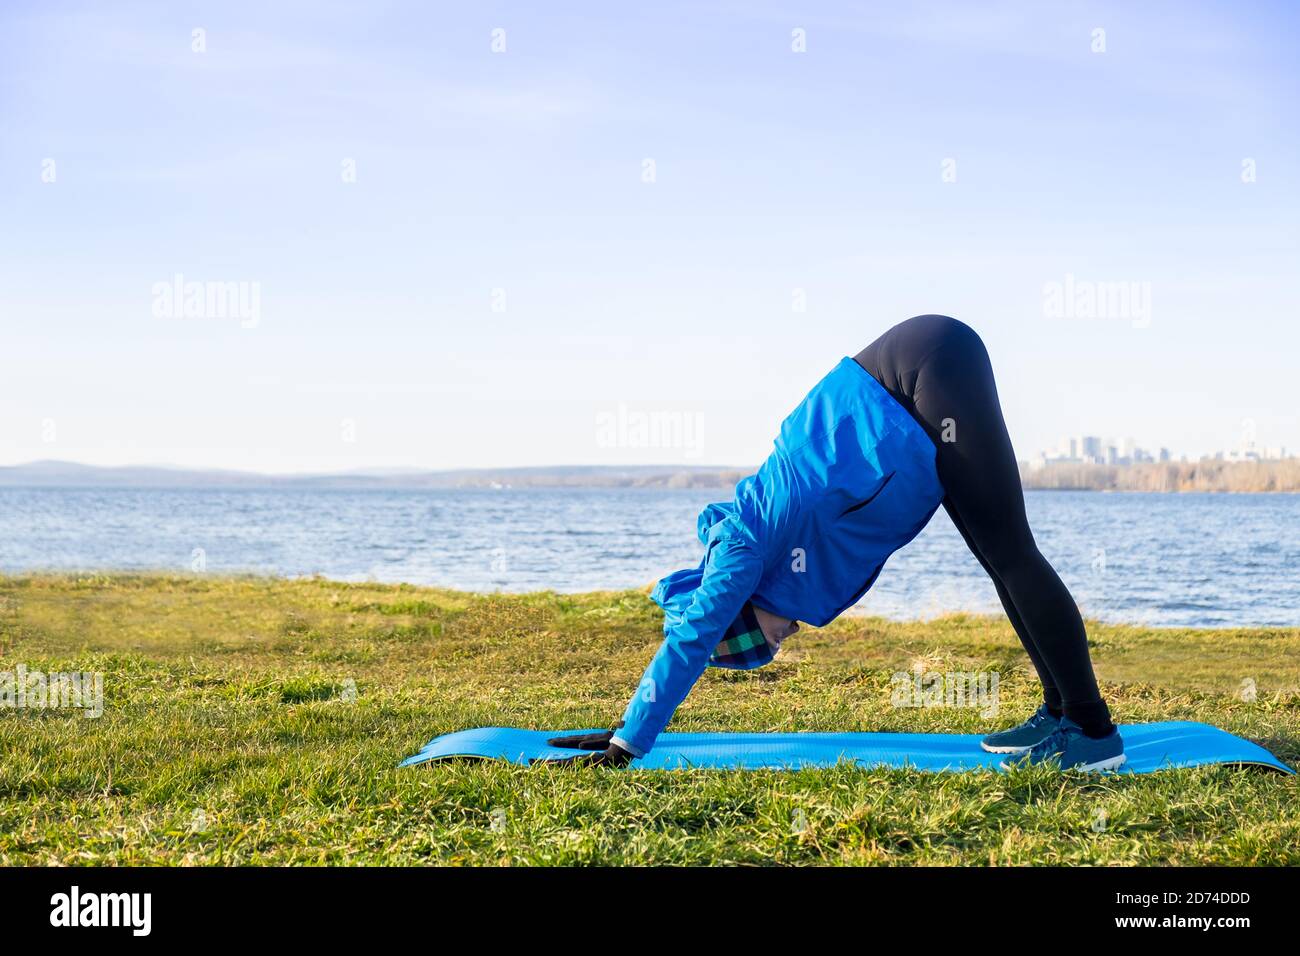 Woman doing exercise in outdoor workout in warm clothes. Stock Photo